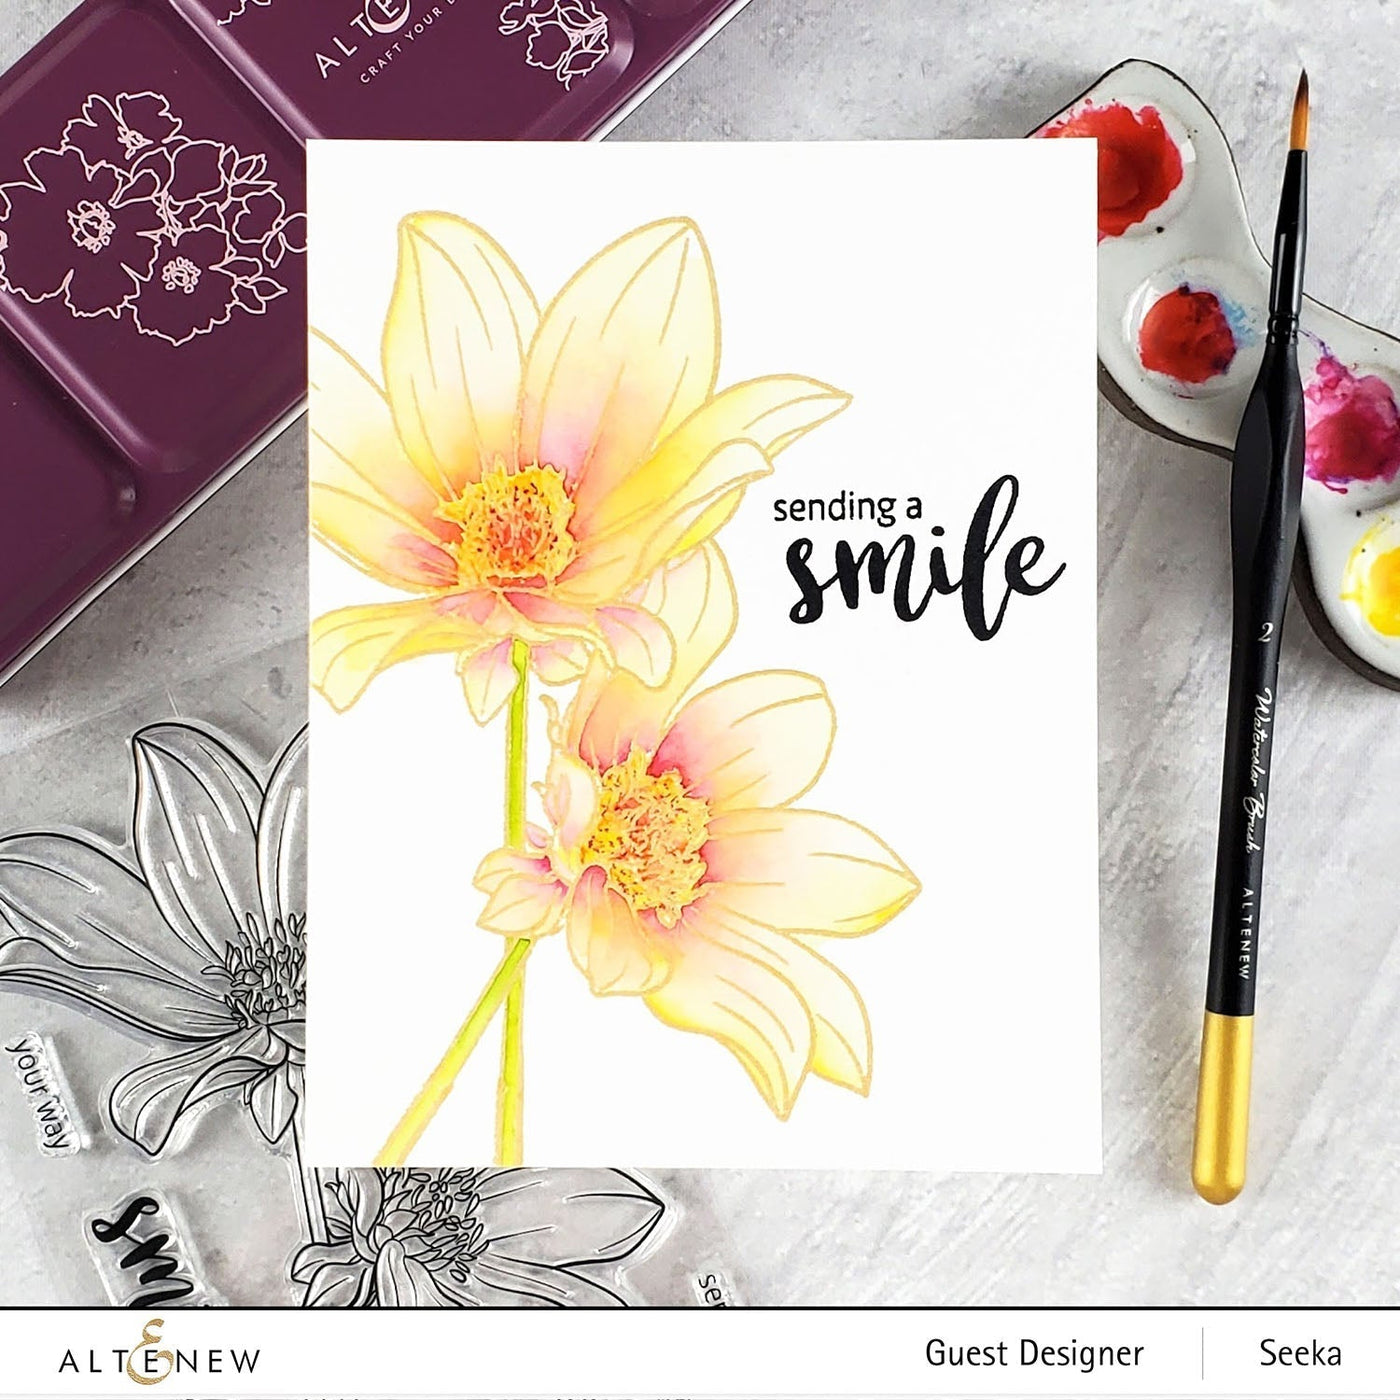 Clear Stamps Paint-A-Flower: Dahlia Bright Eyes Outline Stamp Set